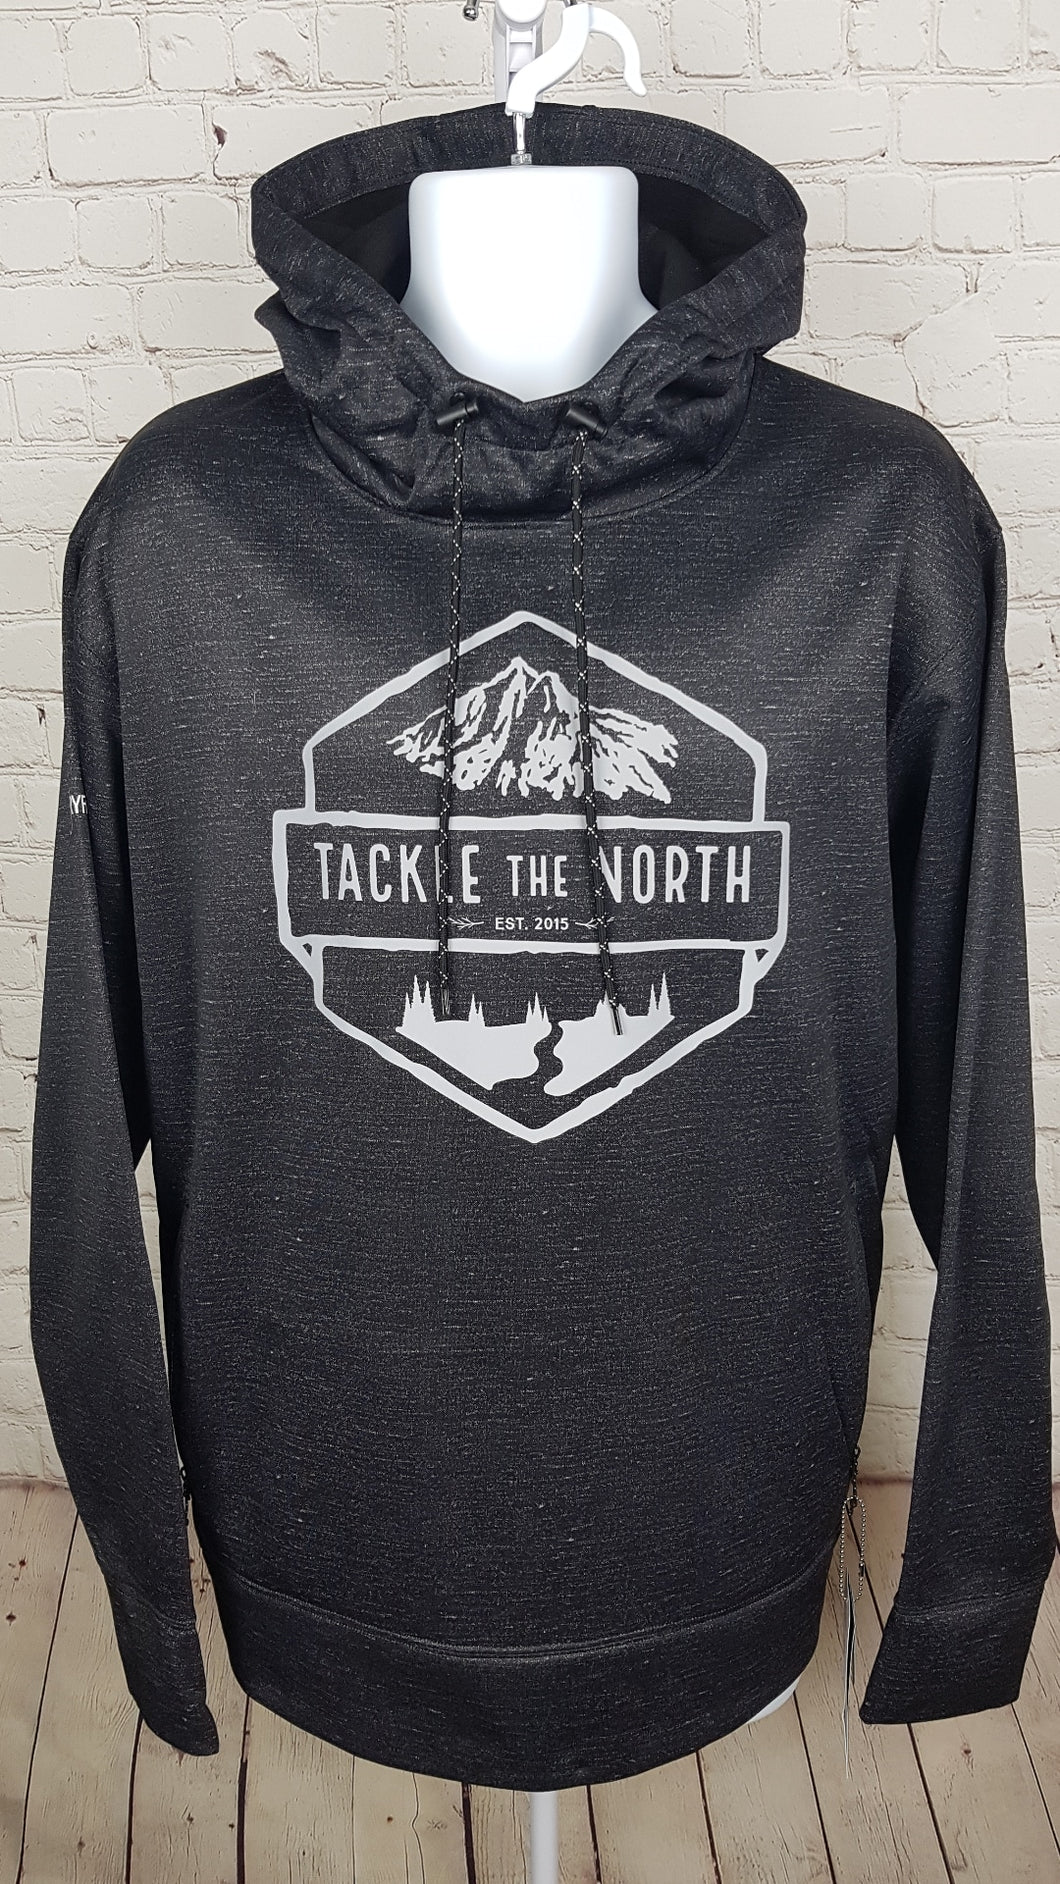 Dryframe Dry Tech Hoodie – Tackle The North